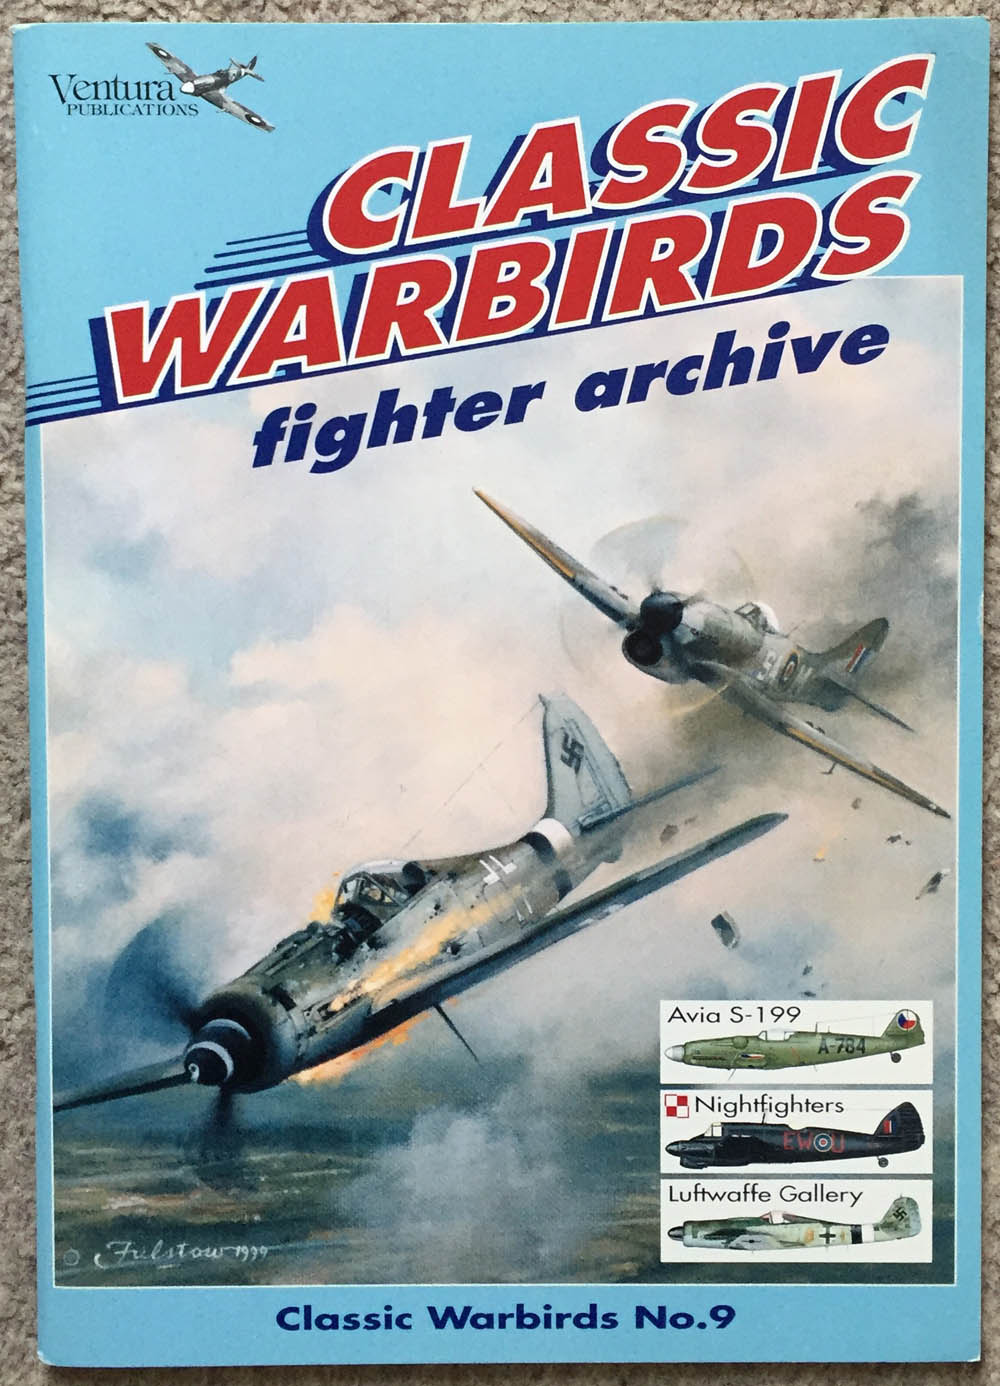 Classic Warbird Series No. 9 - Fighter Archive